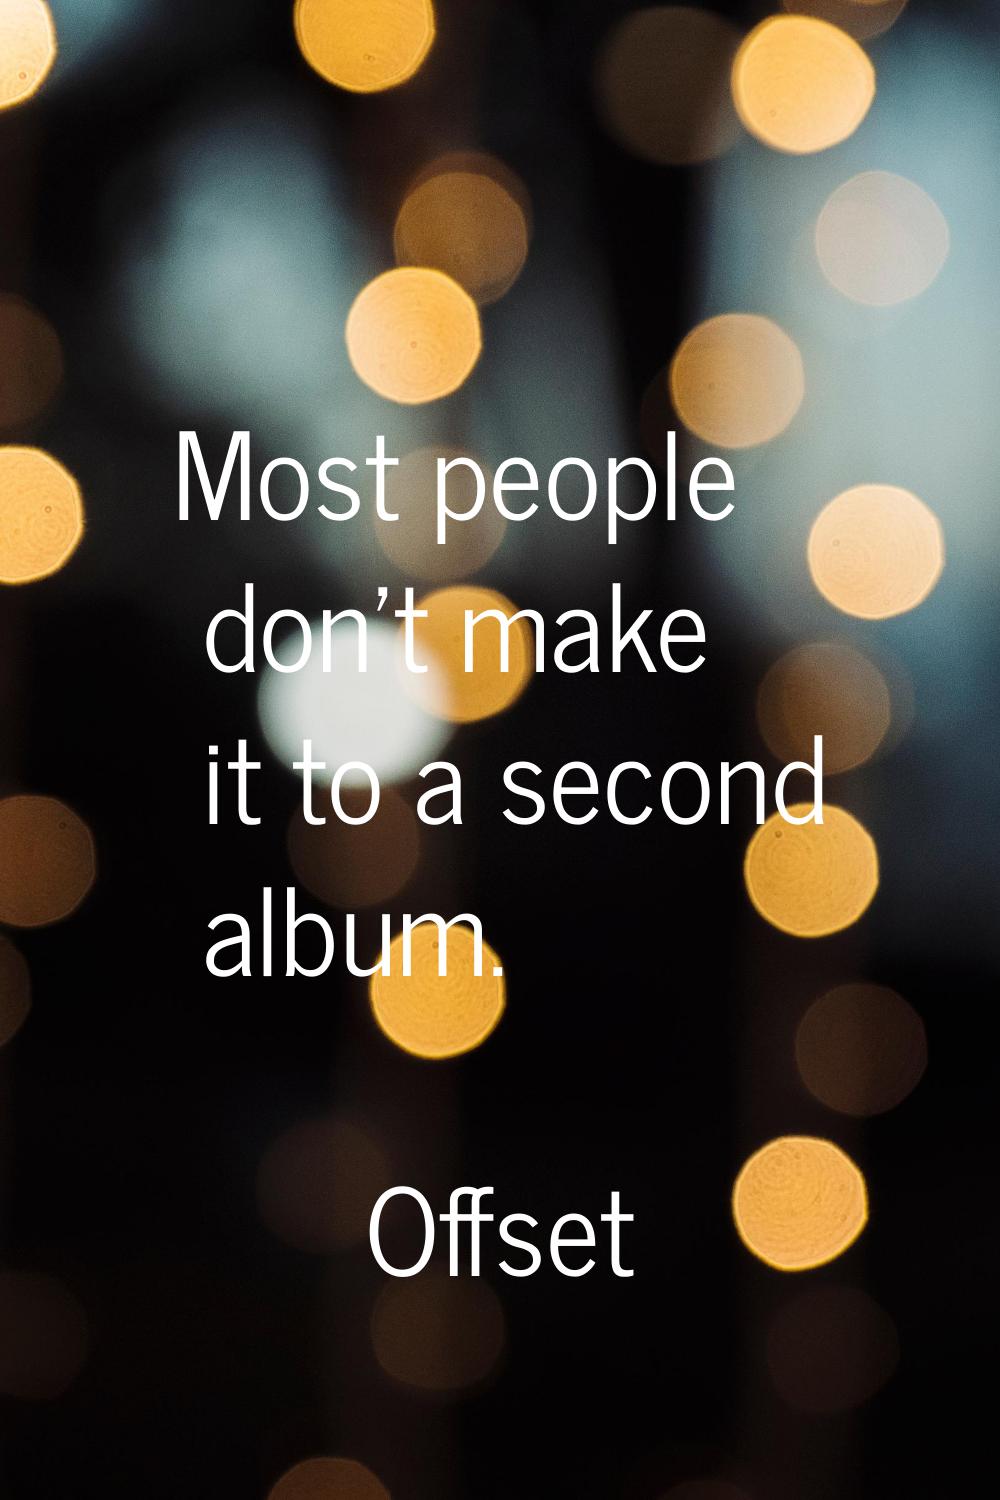 Most people don't make it to a second album.